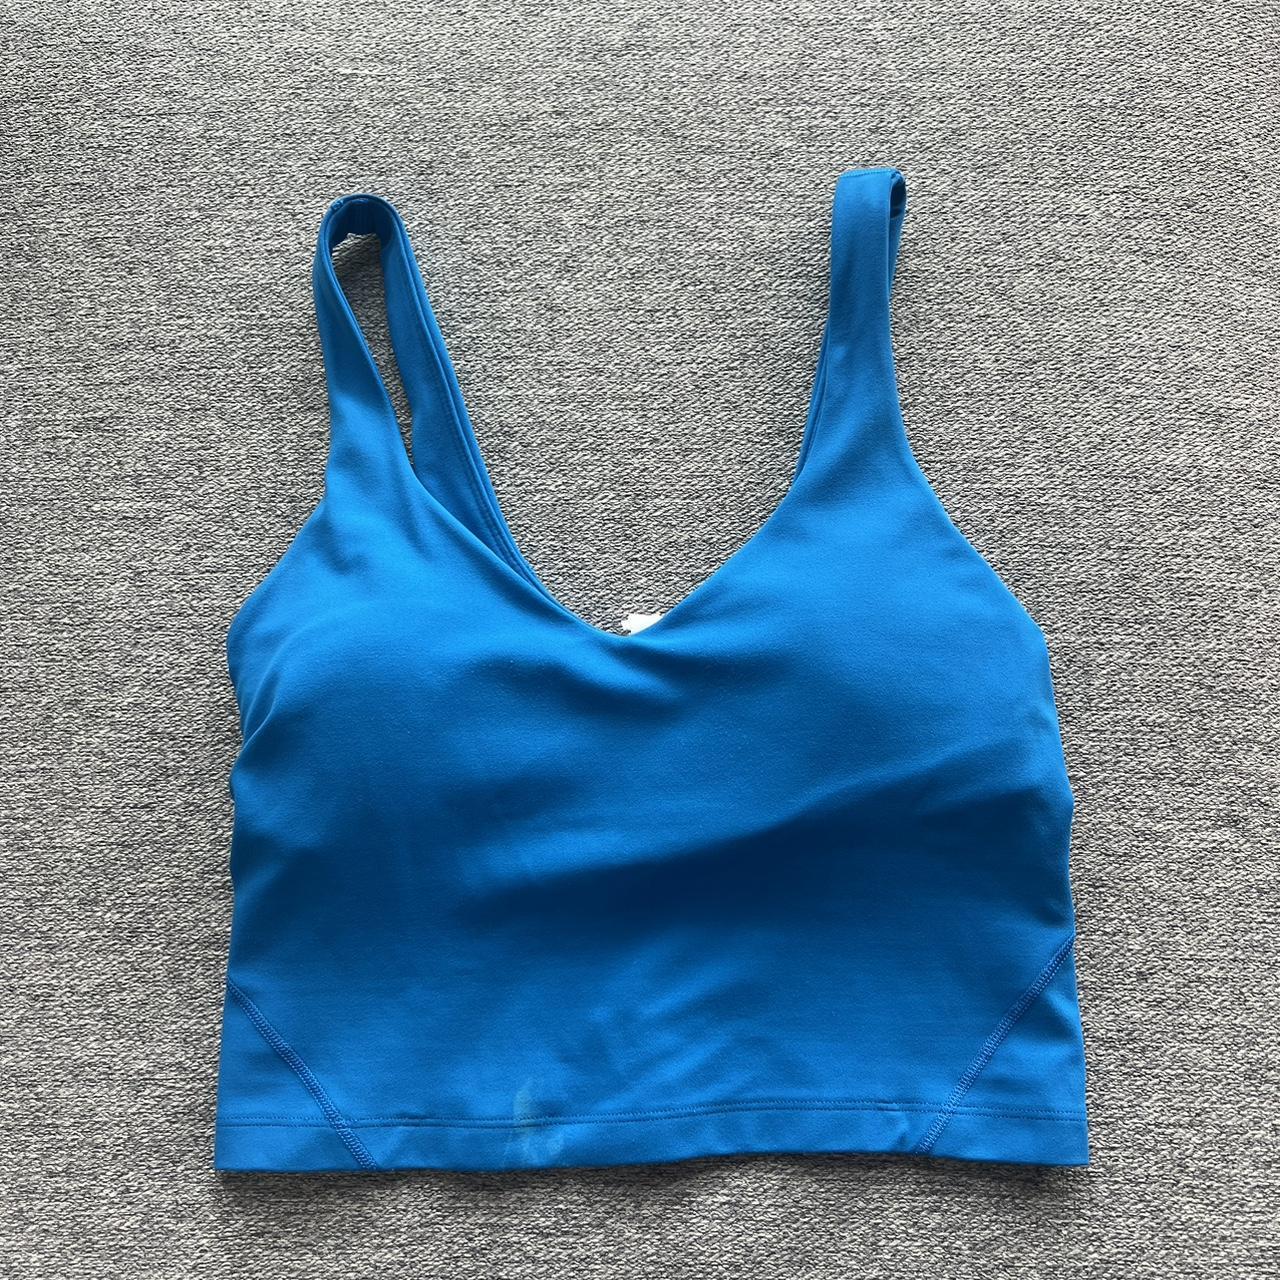 “Pool Blue” Lululemon Align Tank, Size 4, Small stain